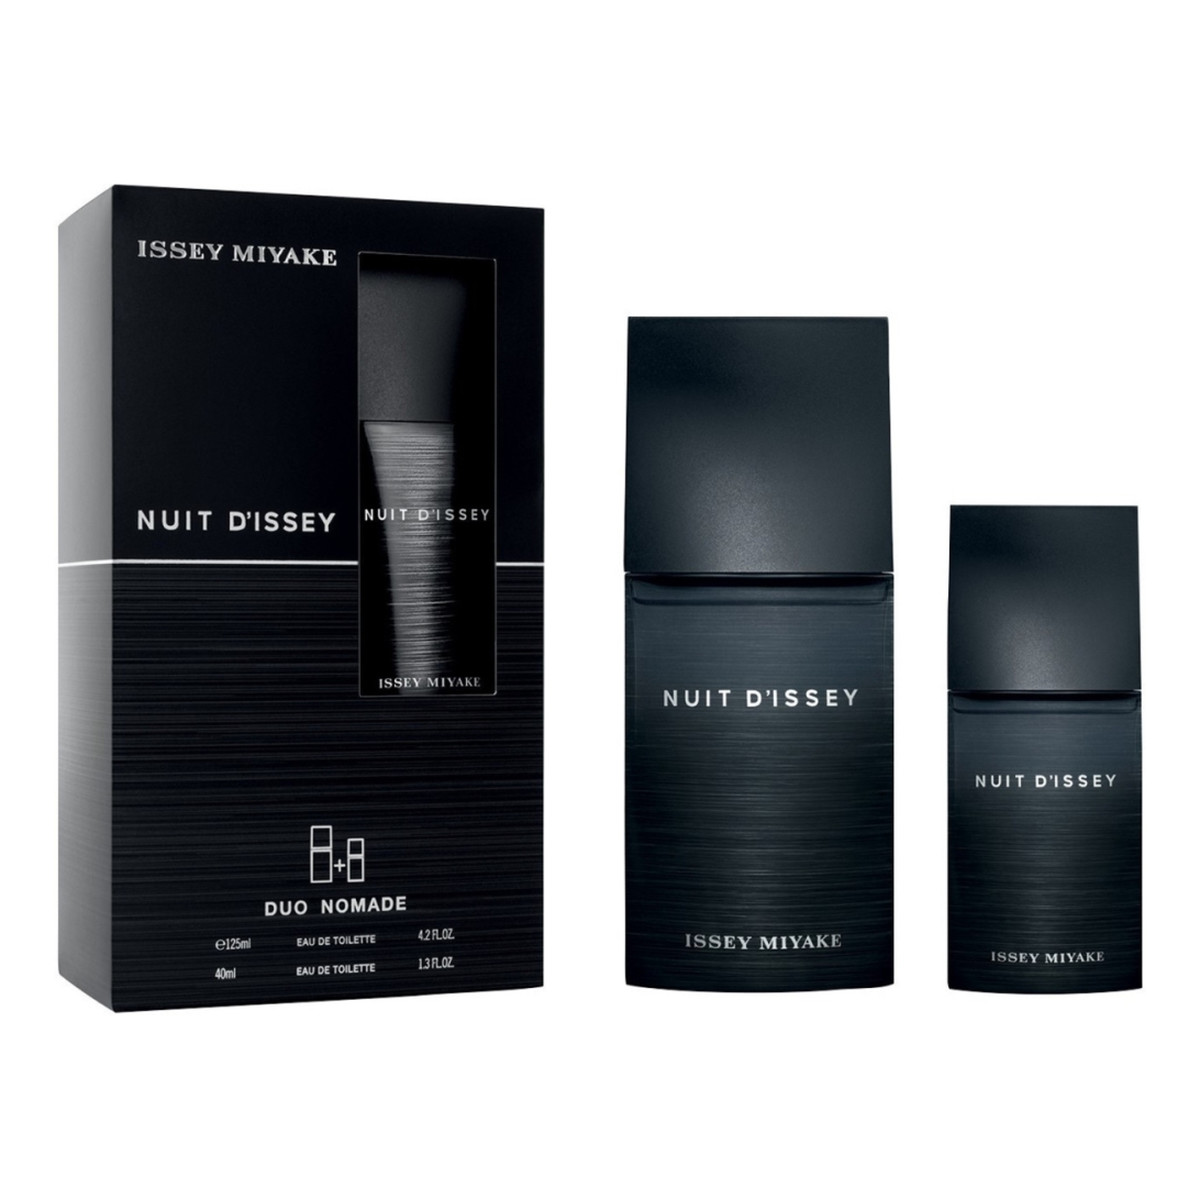 Issey Miyake Nuit D'Issey Pour Homme Zestaw woda toaletowa spray 125ml + woda toaletowa spray 40ml